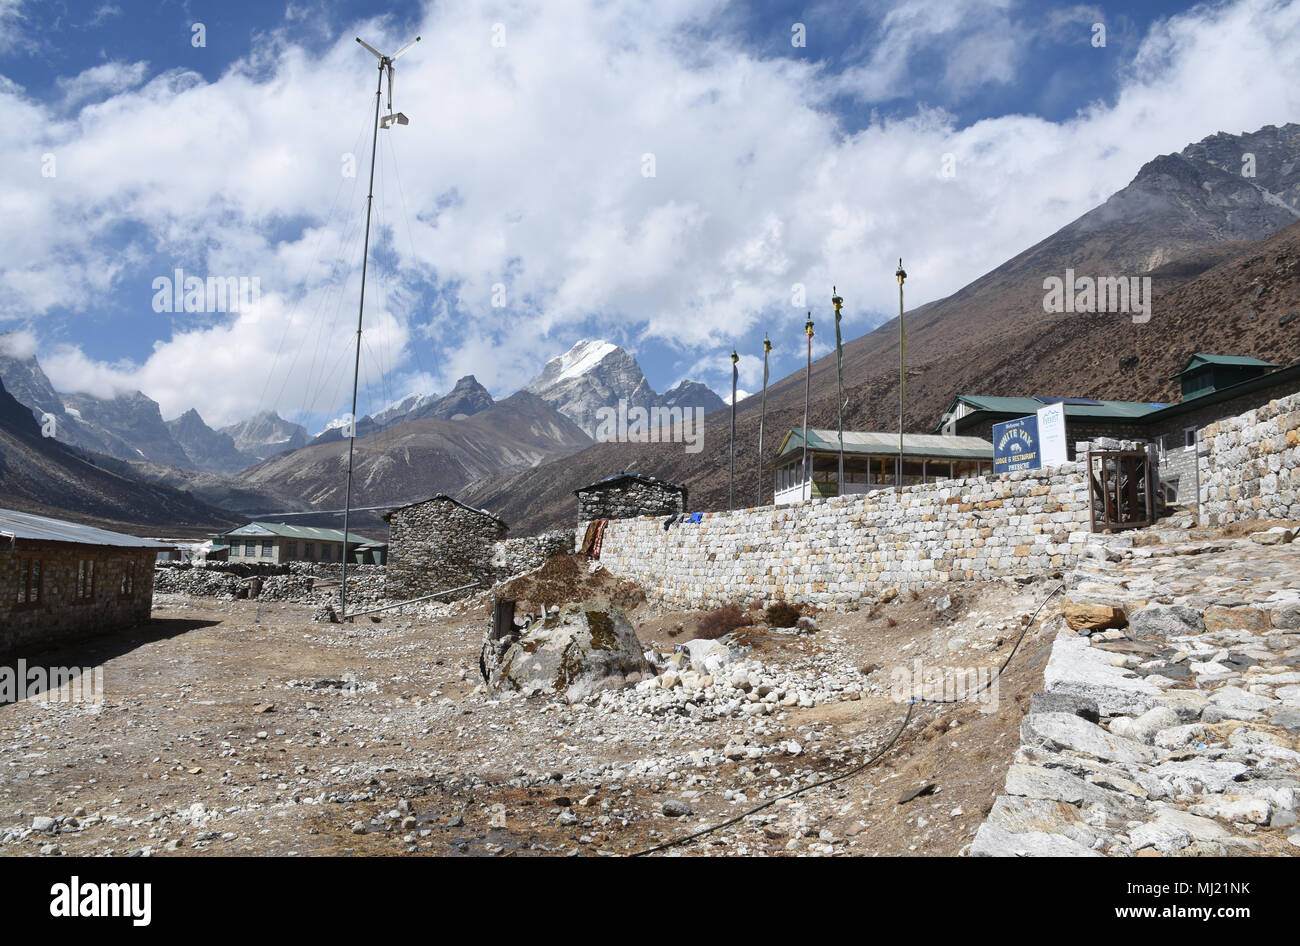 Pheriche, Nepal - March 16, 2018: White Yak Hotel in Pheriche with surrounding mountains Stock Photo